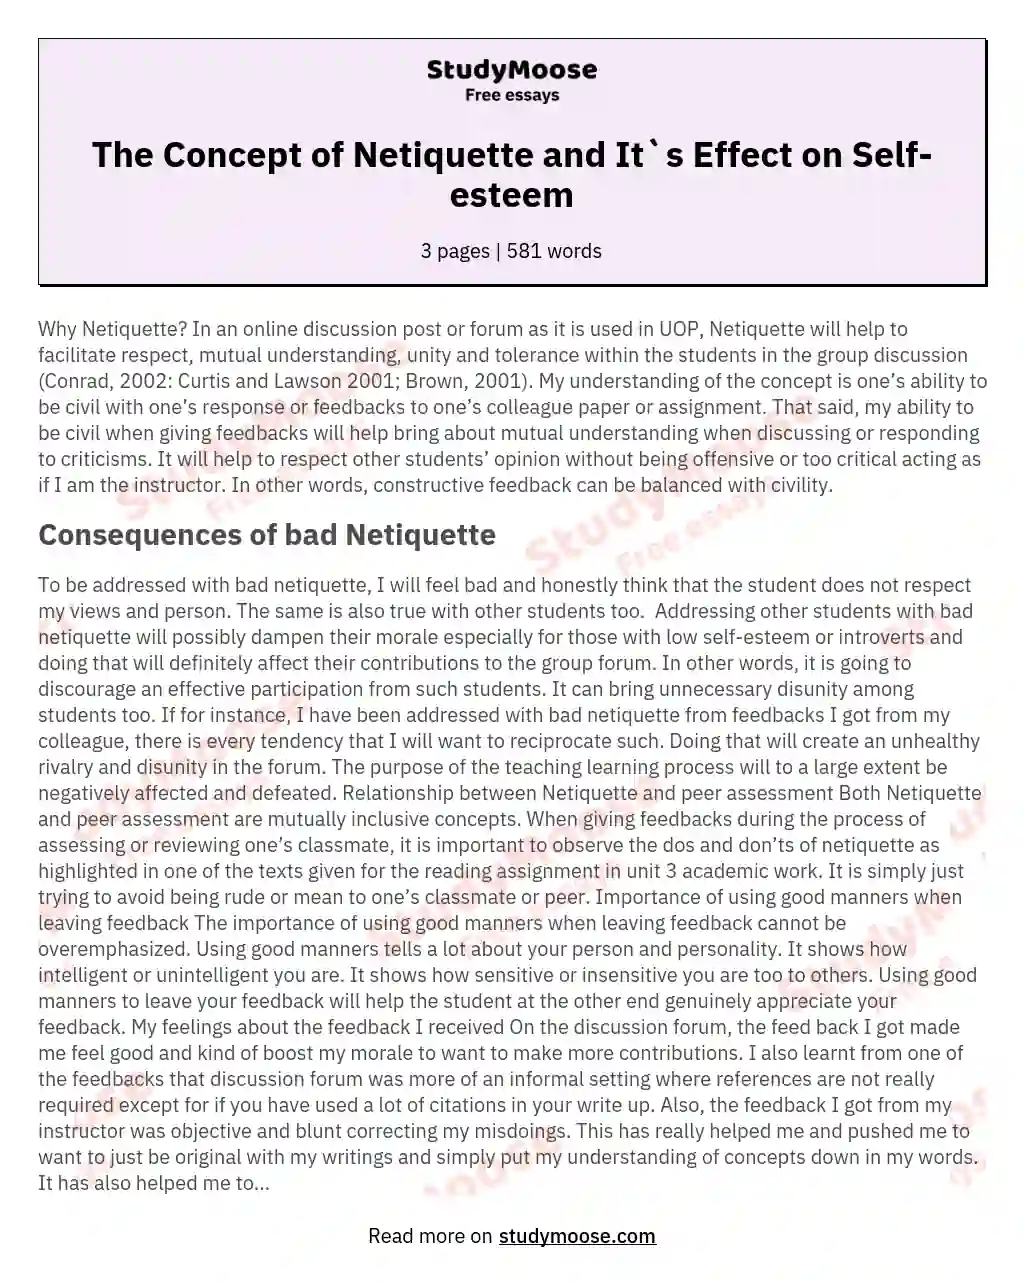 The Concept of Netiquette and It`s Effect on Self-esteem